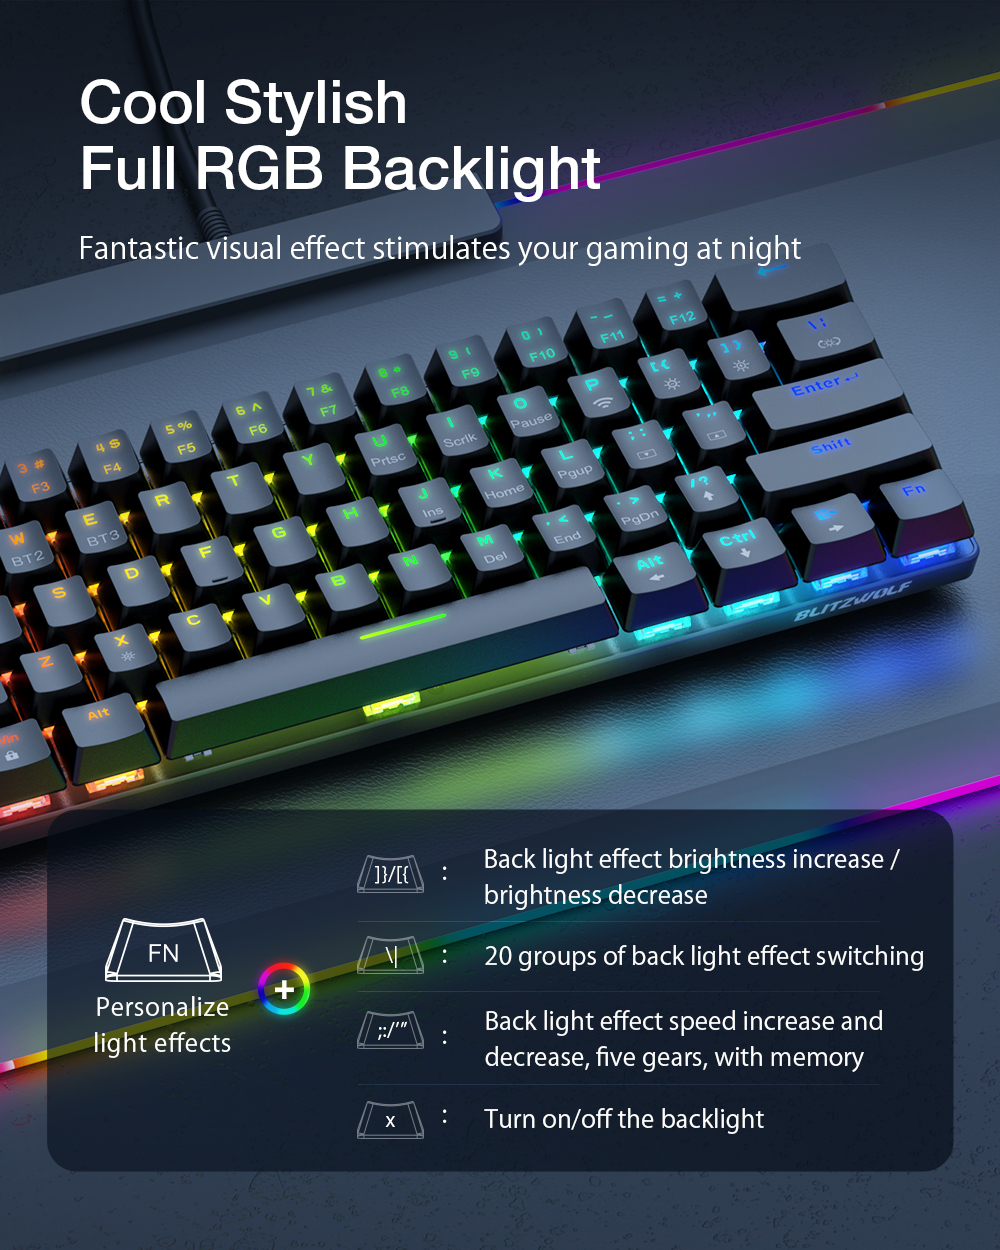 BlitzWolf BW-KB0 61 Keys bluetooth 5.0 RGB Mechanical Keyboard Hot Swappable Wired Dual Mode 60% Gaming Keyboard With Software For Mac/Win